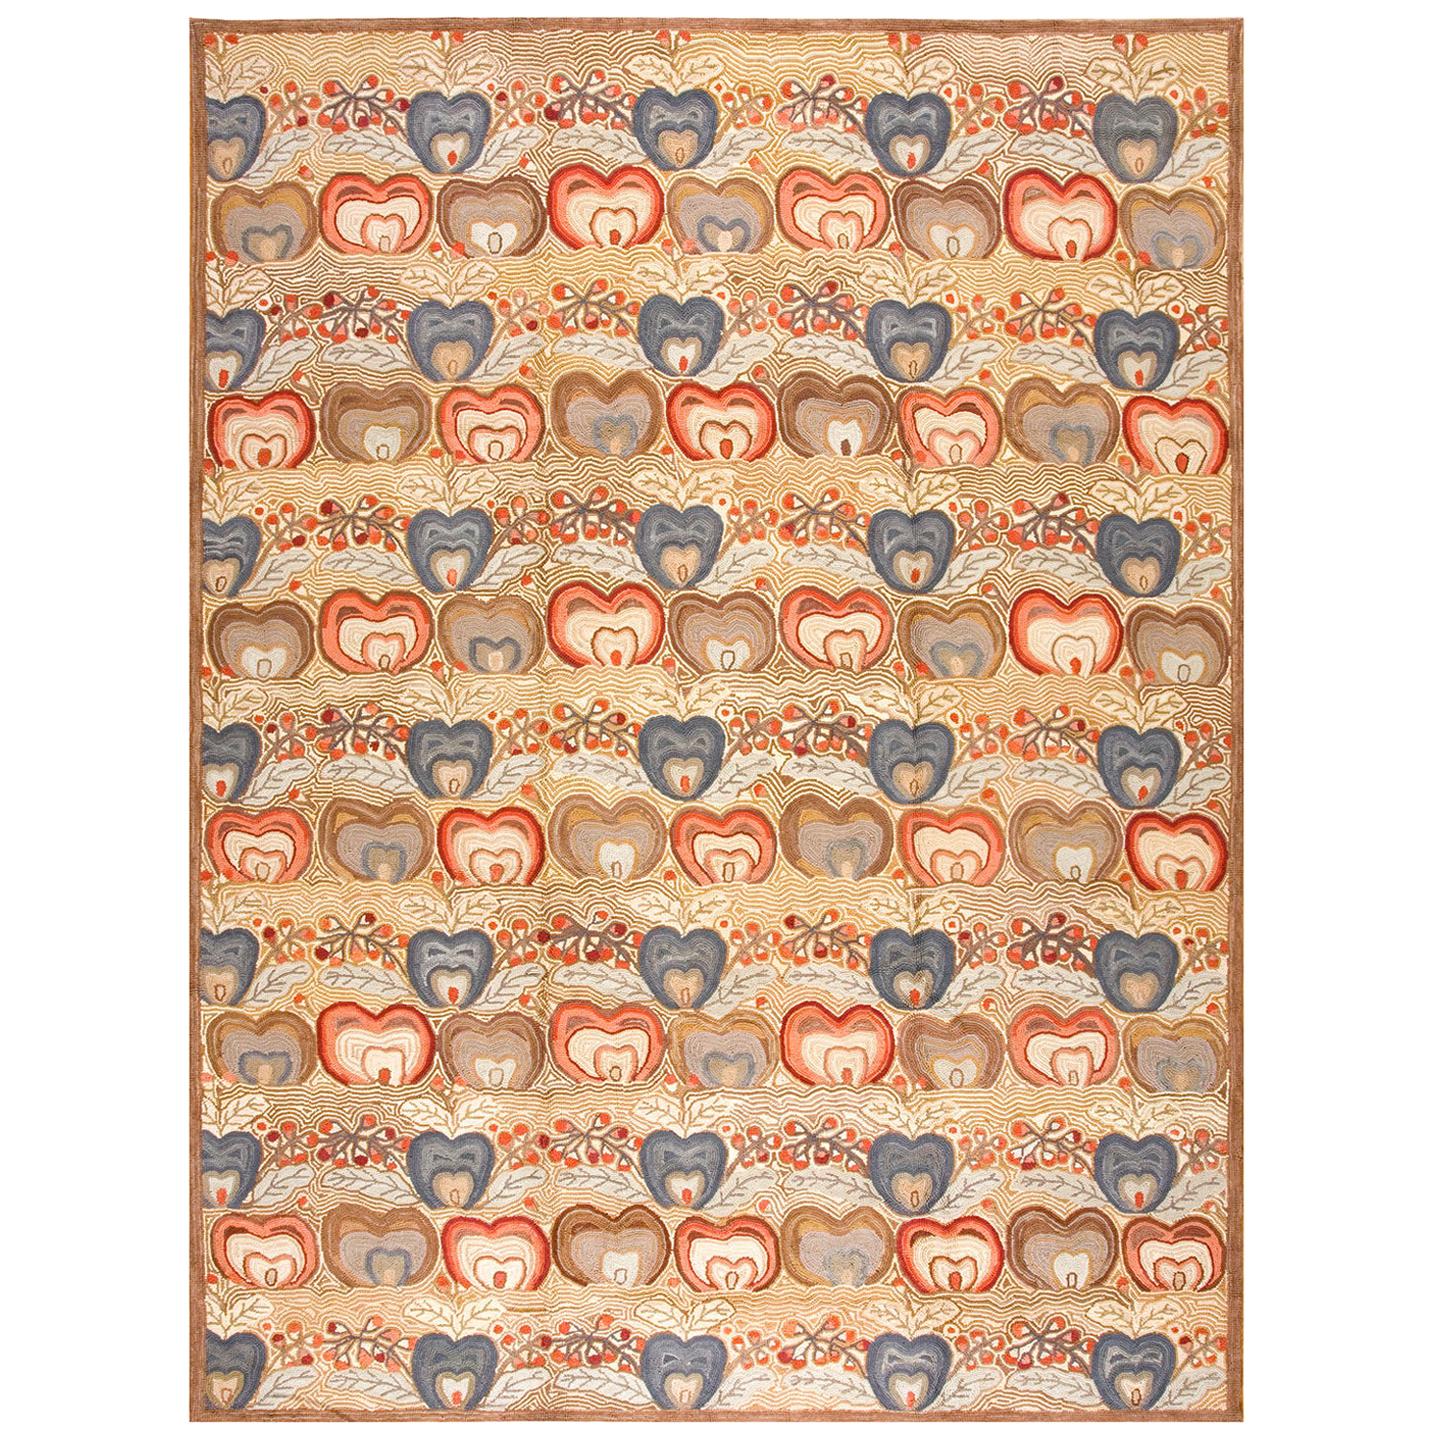 Contemporary American Hooked Rug (6' x 9' - 183x274 )